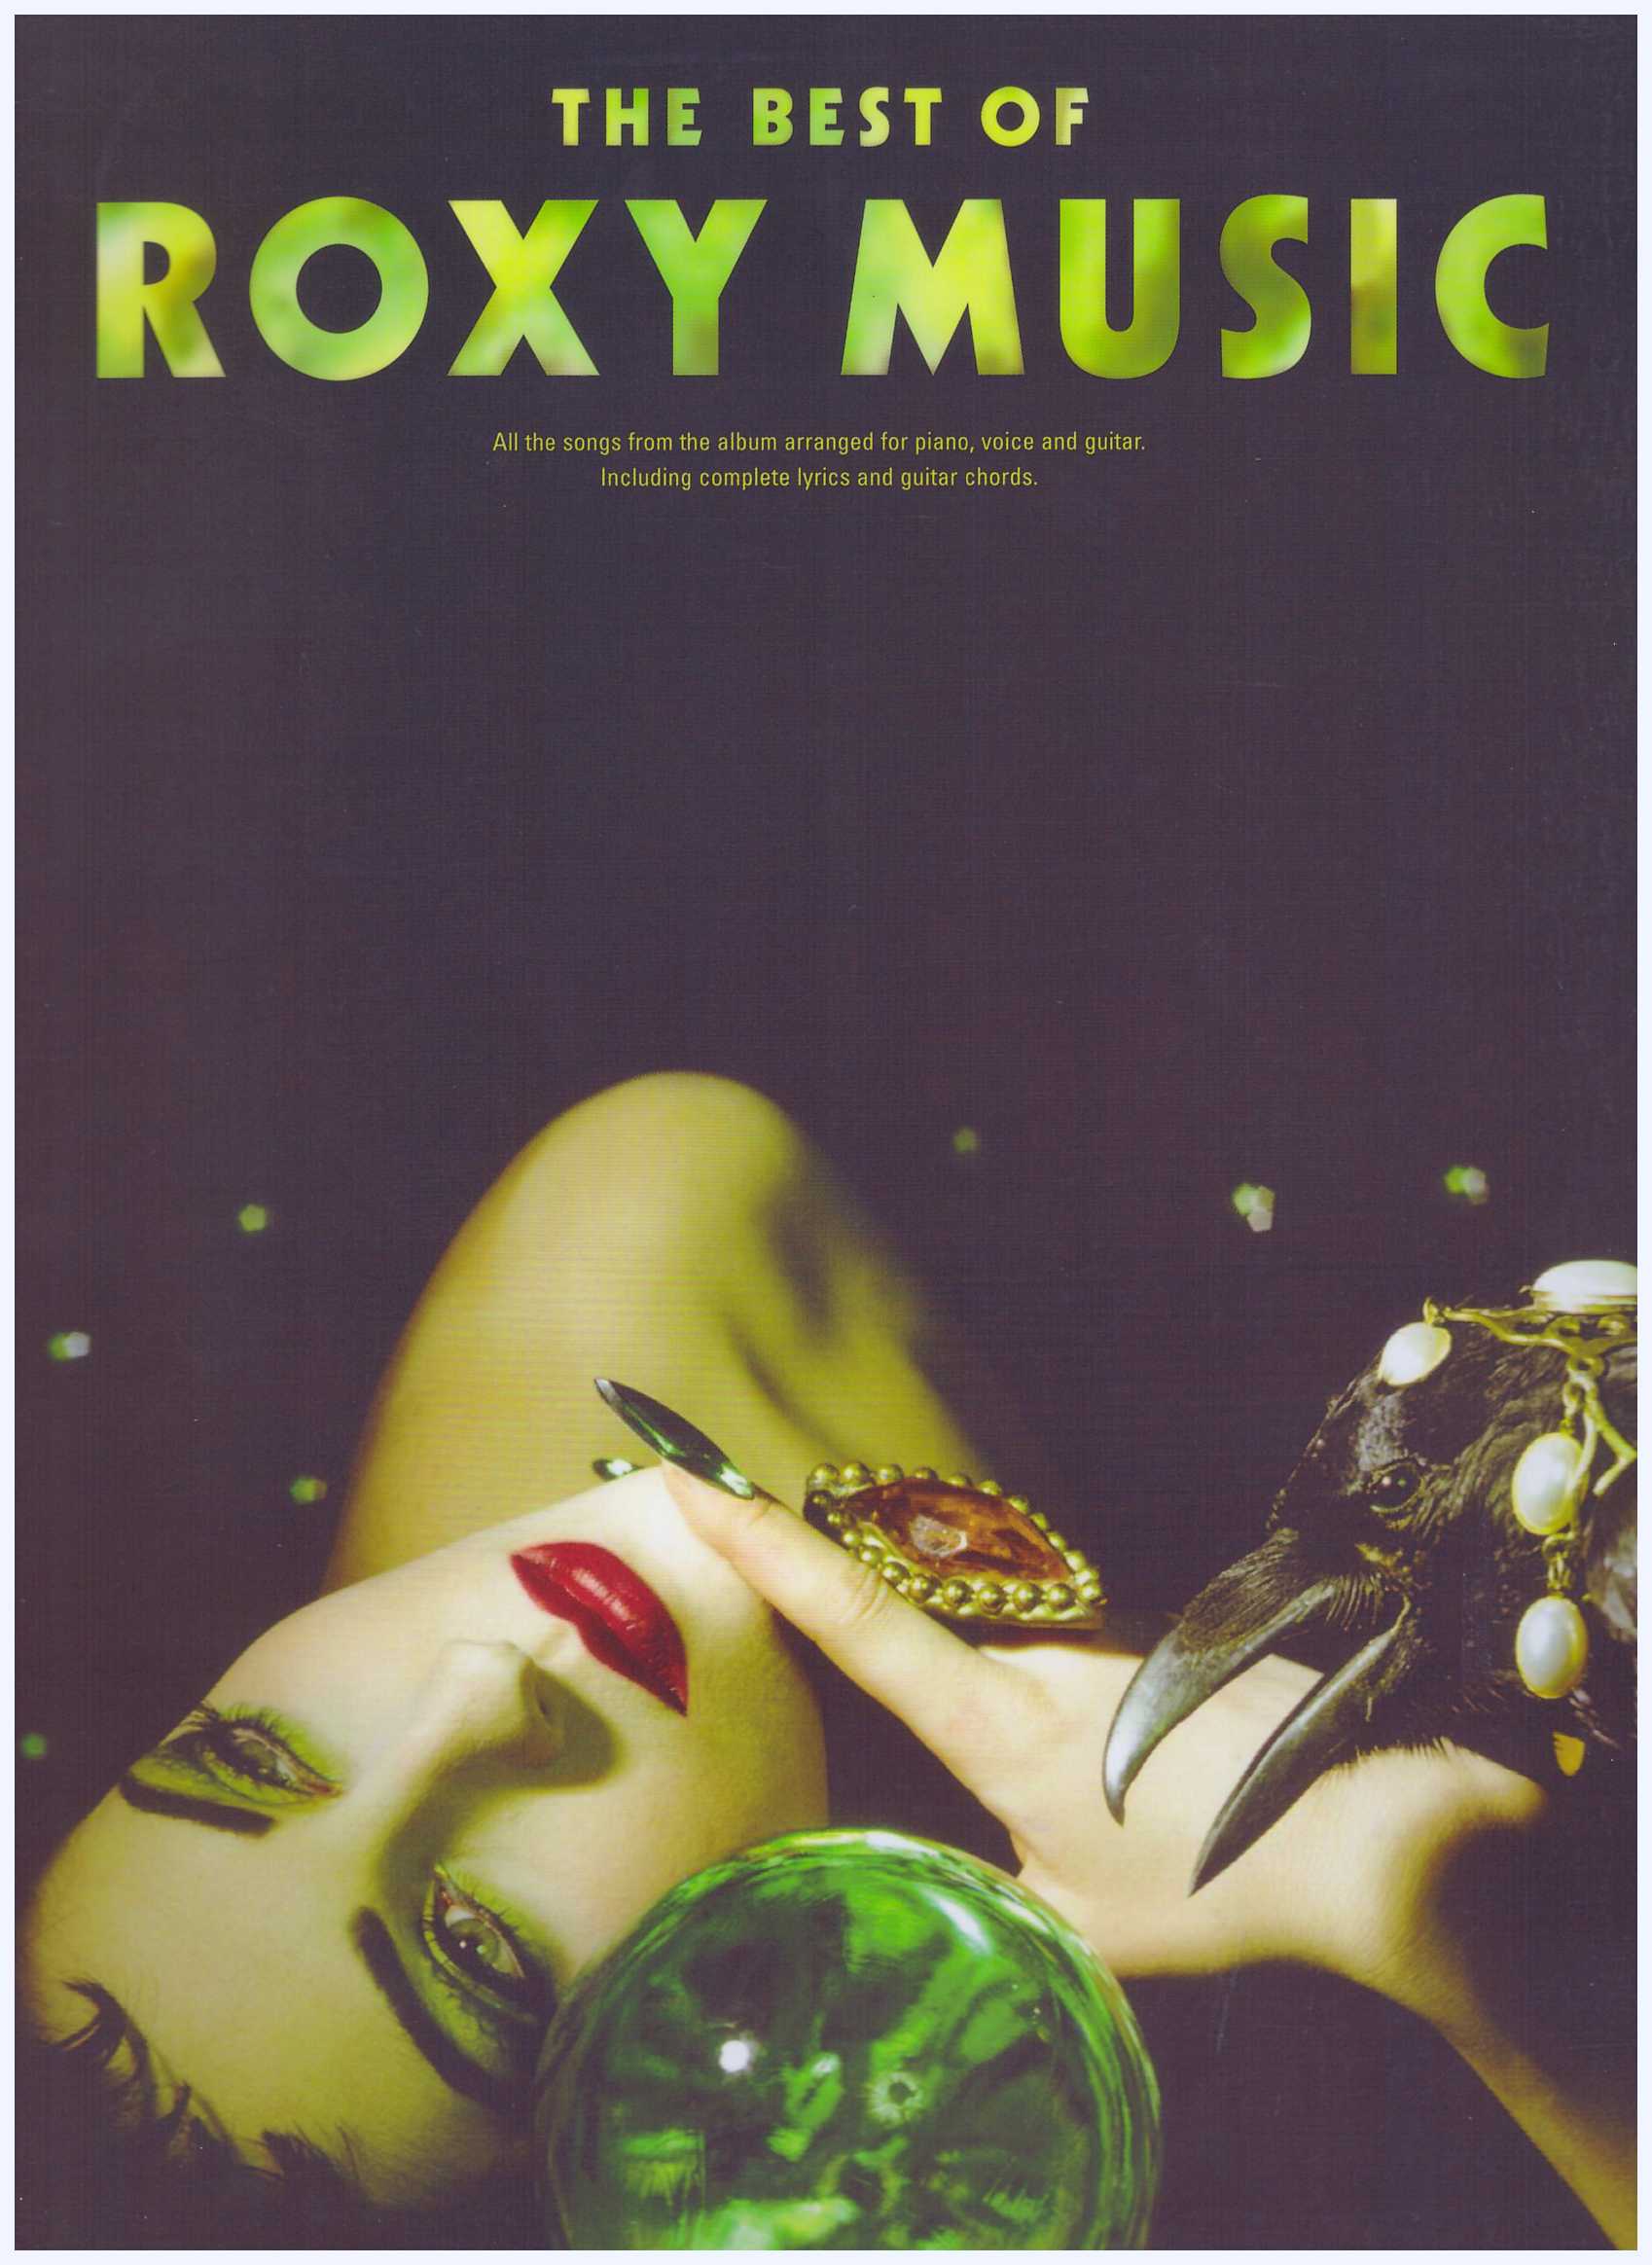 The Best Of Roxy Music / PVG Book / Piano Book / Pop Song Book / Vocal Book / Voice Book / Guitar Book / Gitar Book